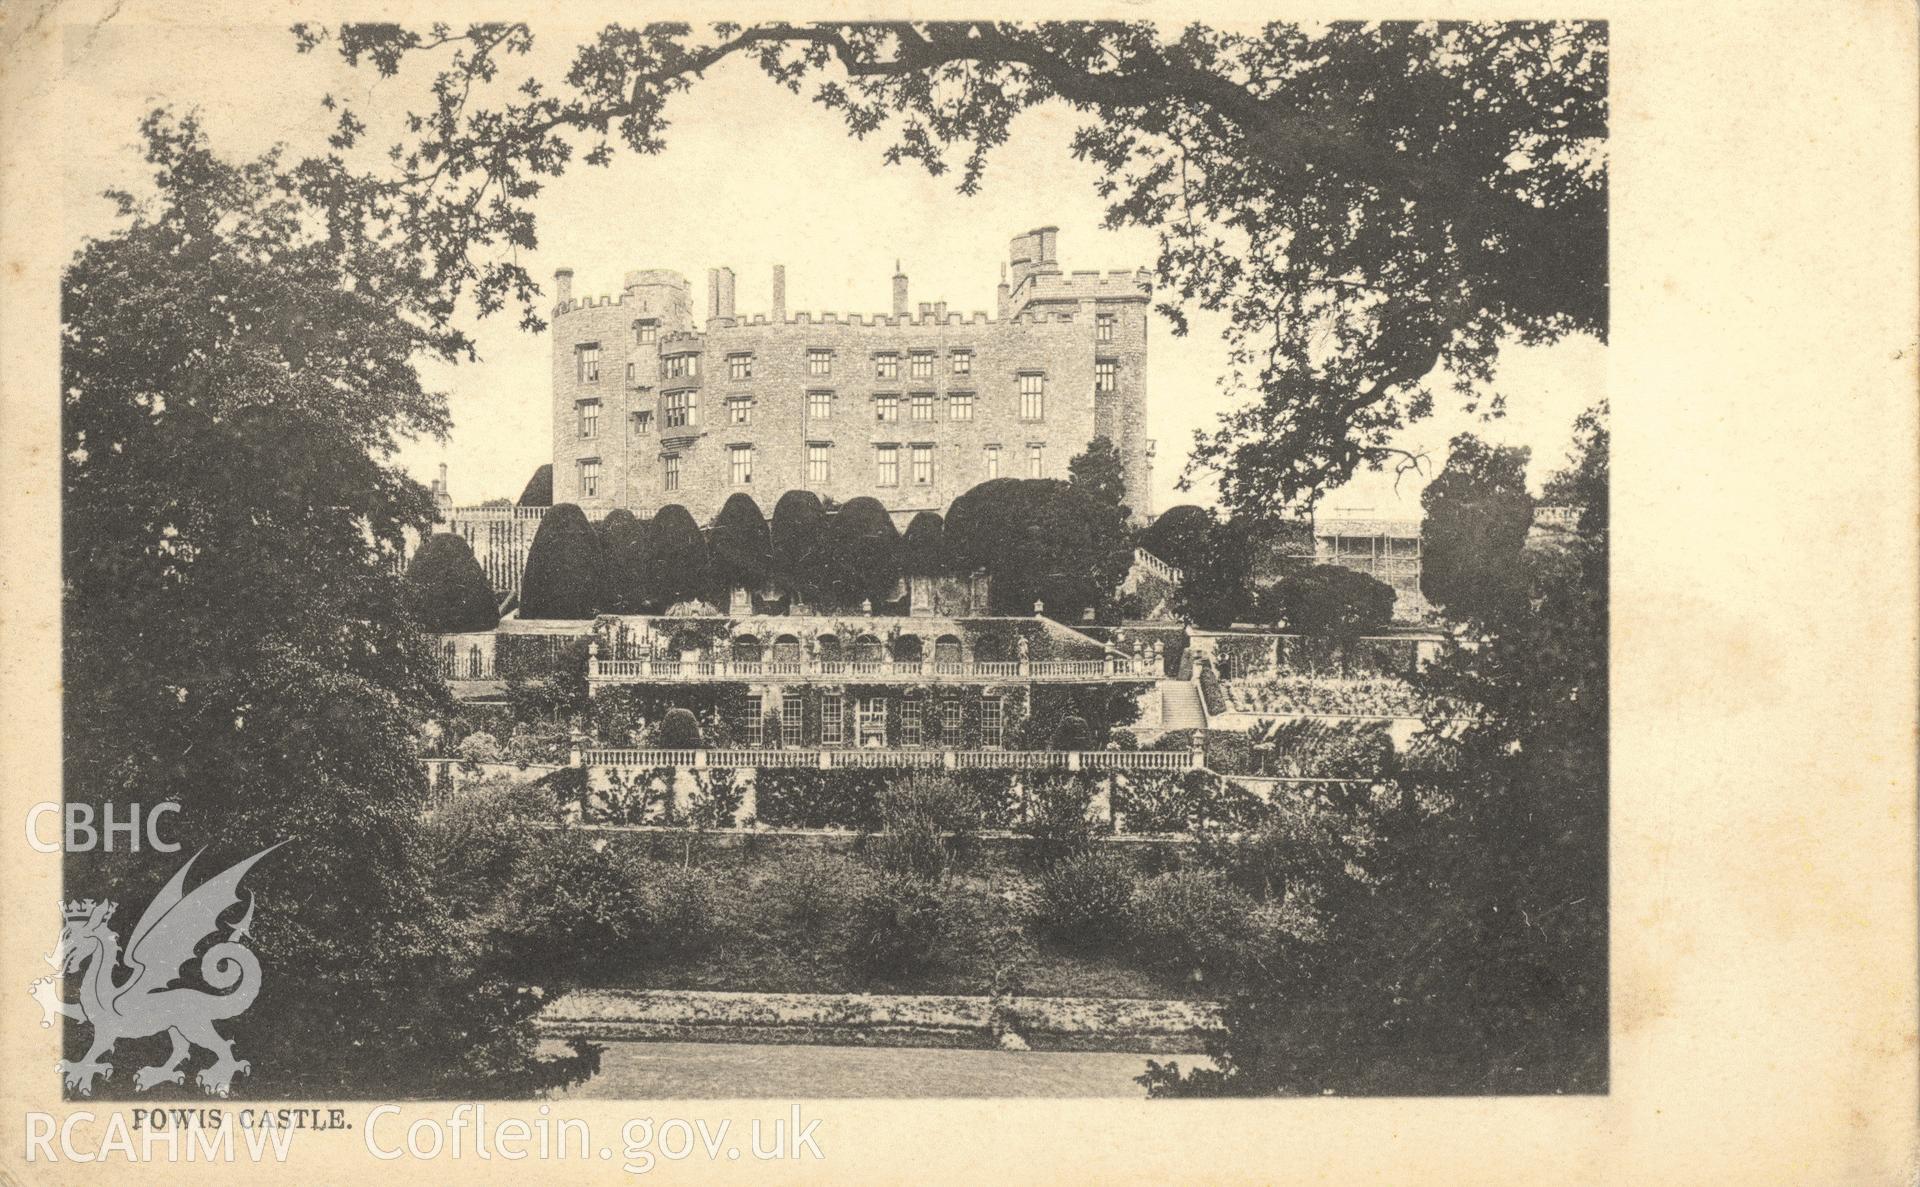 Digitised postcard image of Powis Castle showing Castle and terraces. Produced by Parks and Gardens Data Services, from an original item in the Peter Davis Collection at Parks and Gardens UK. We hold only web-resolution images of this collection, suitable for viewing on screen and for research purposes only. We do not hold the original images, or publication quality scans.